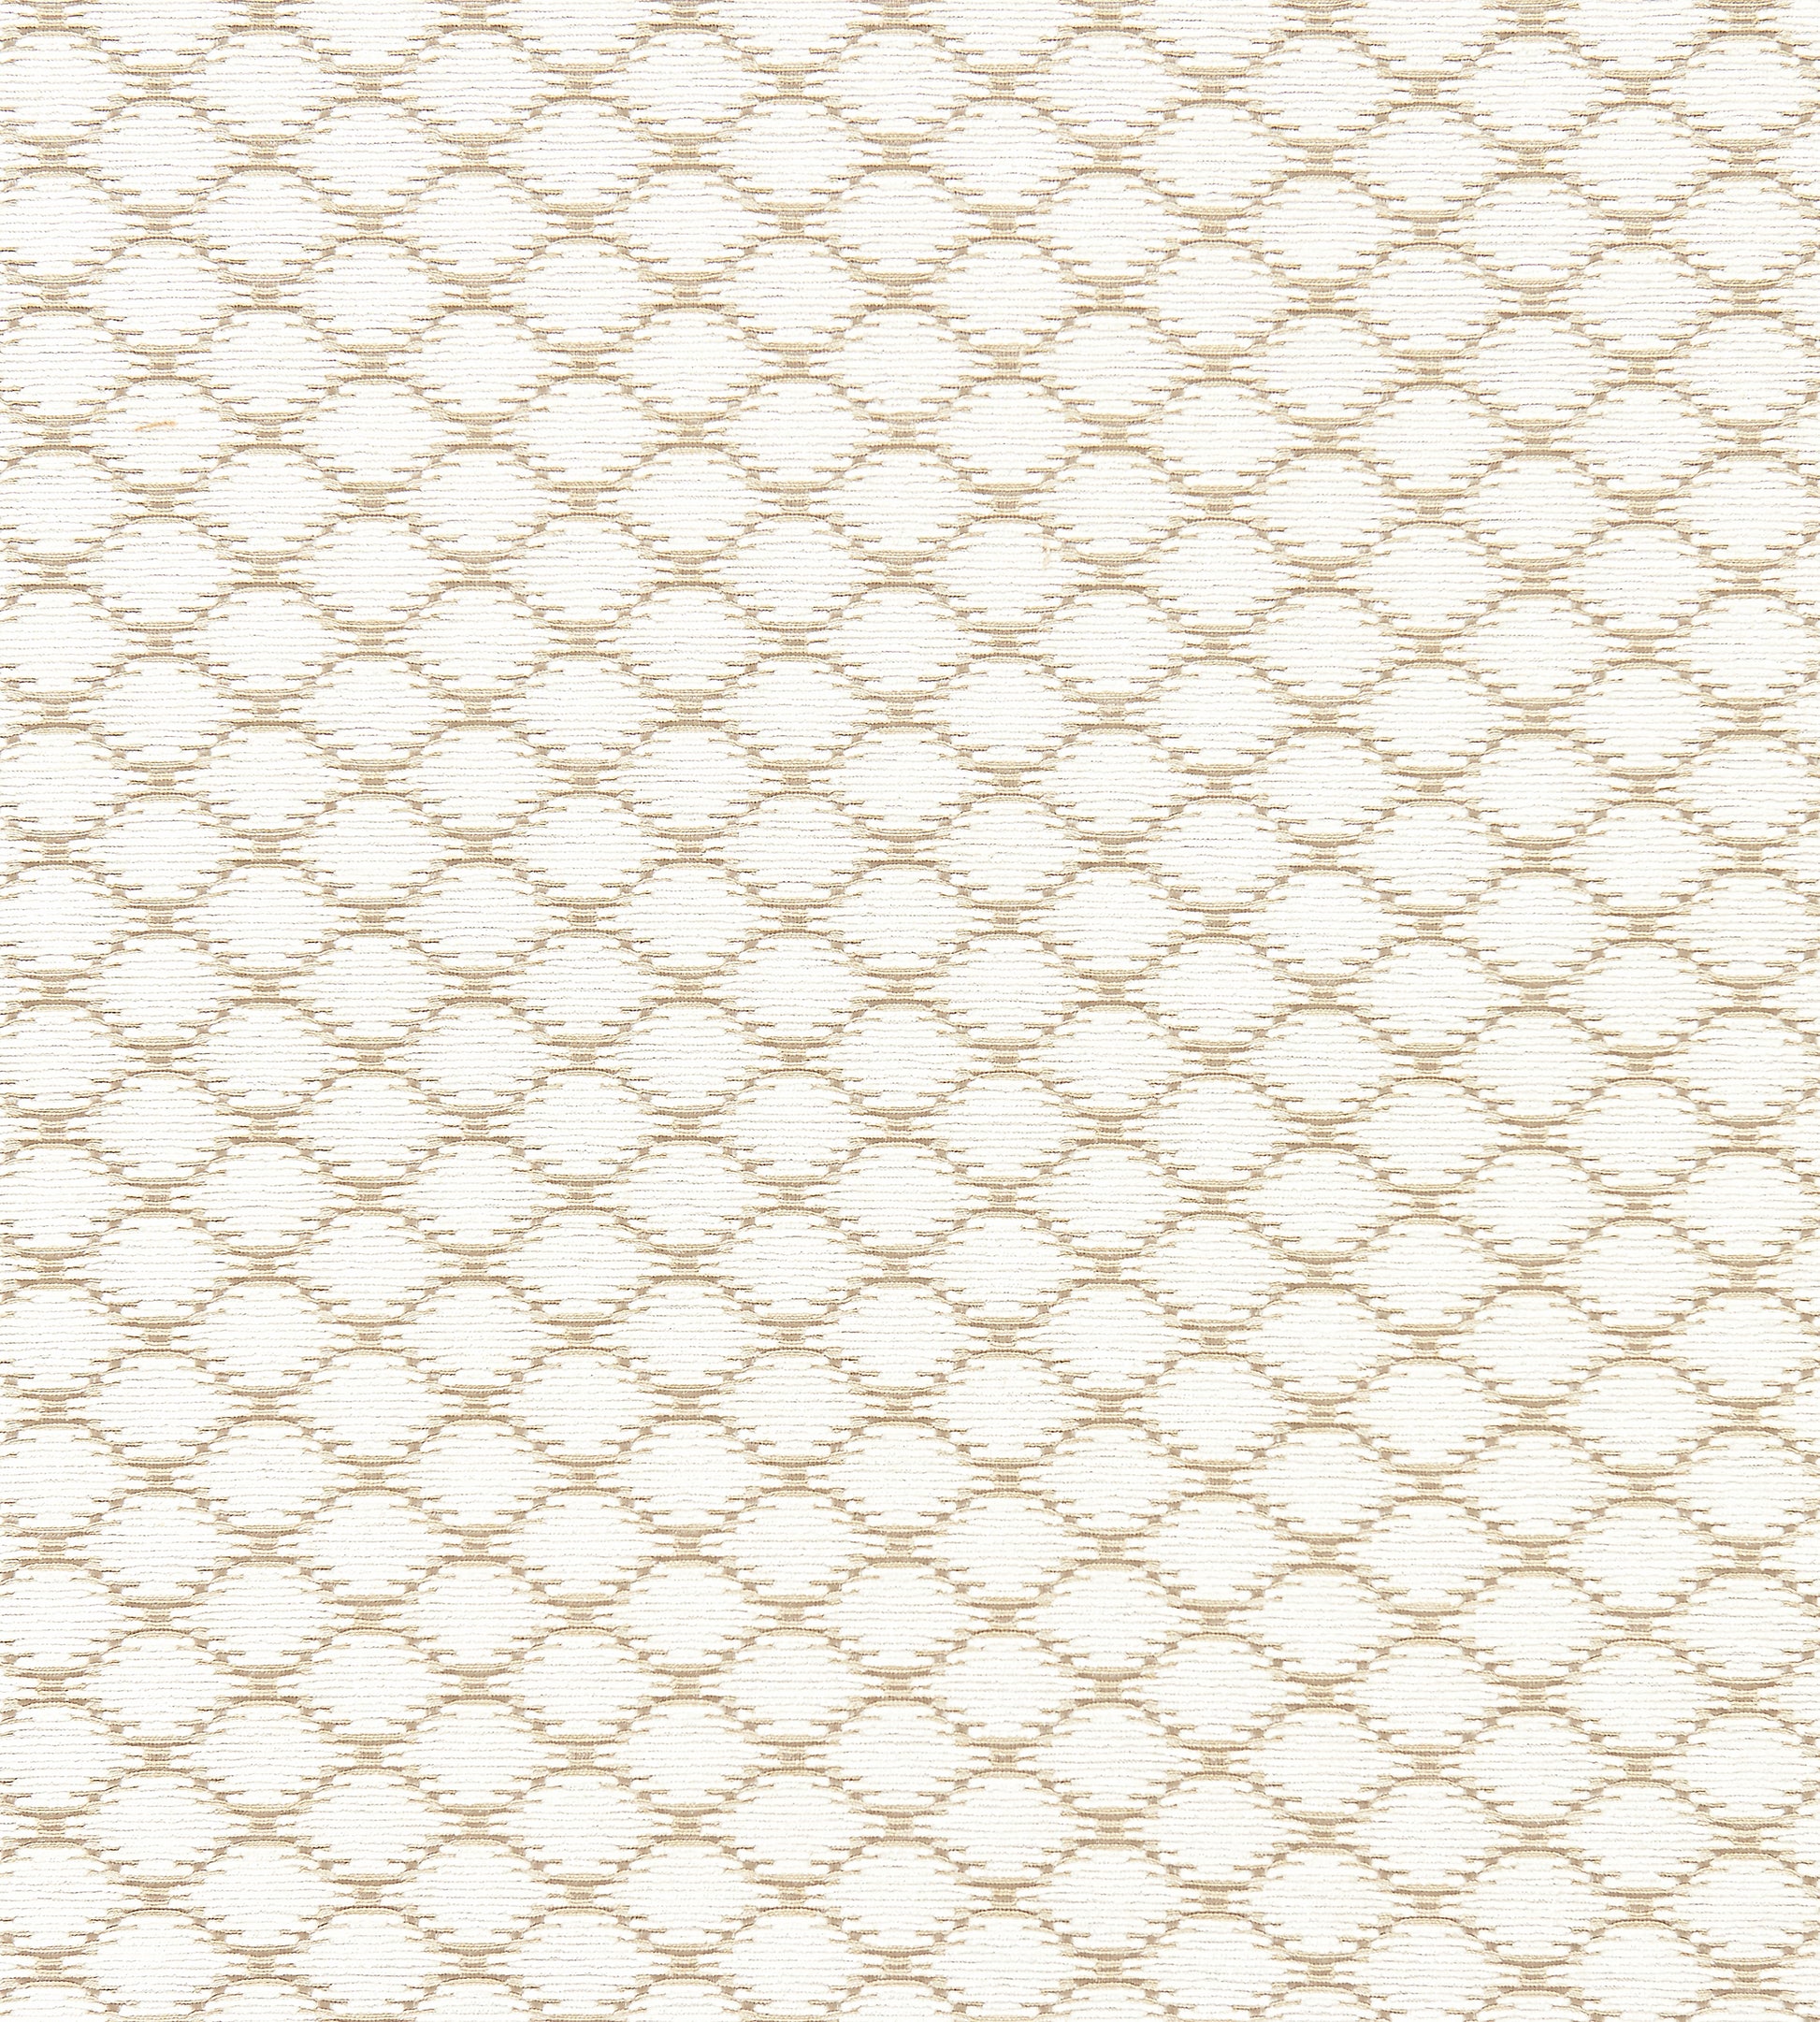 Purchase Scalamandre Fabric Pattern number SC 000127101, Tristan Weave White Sand 1